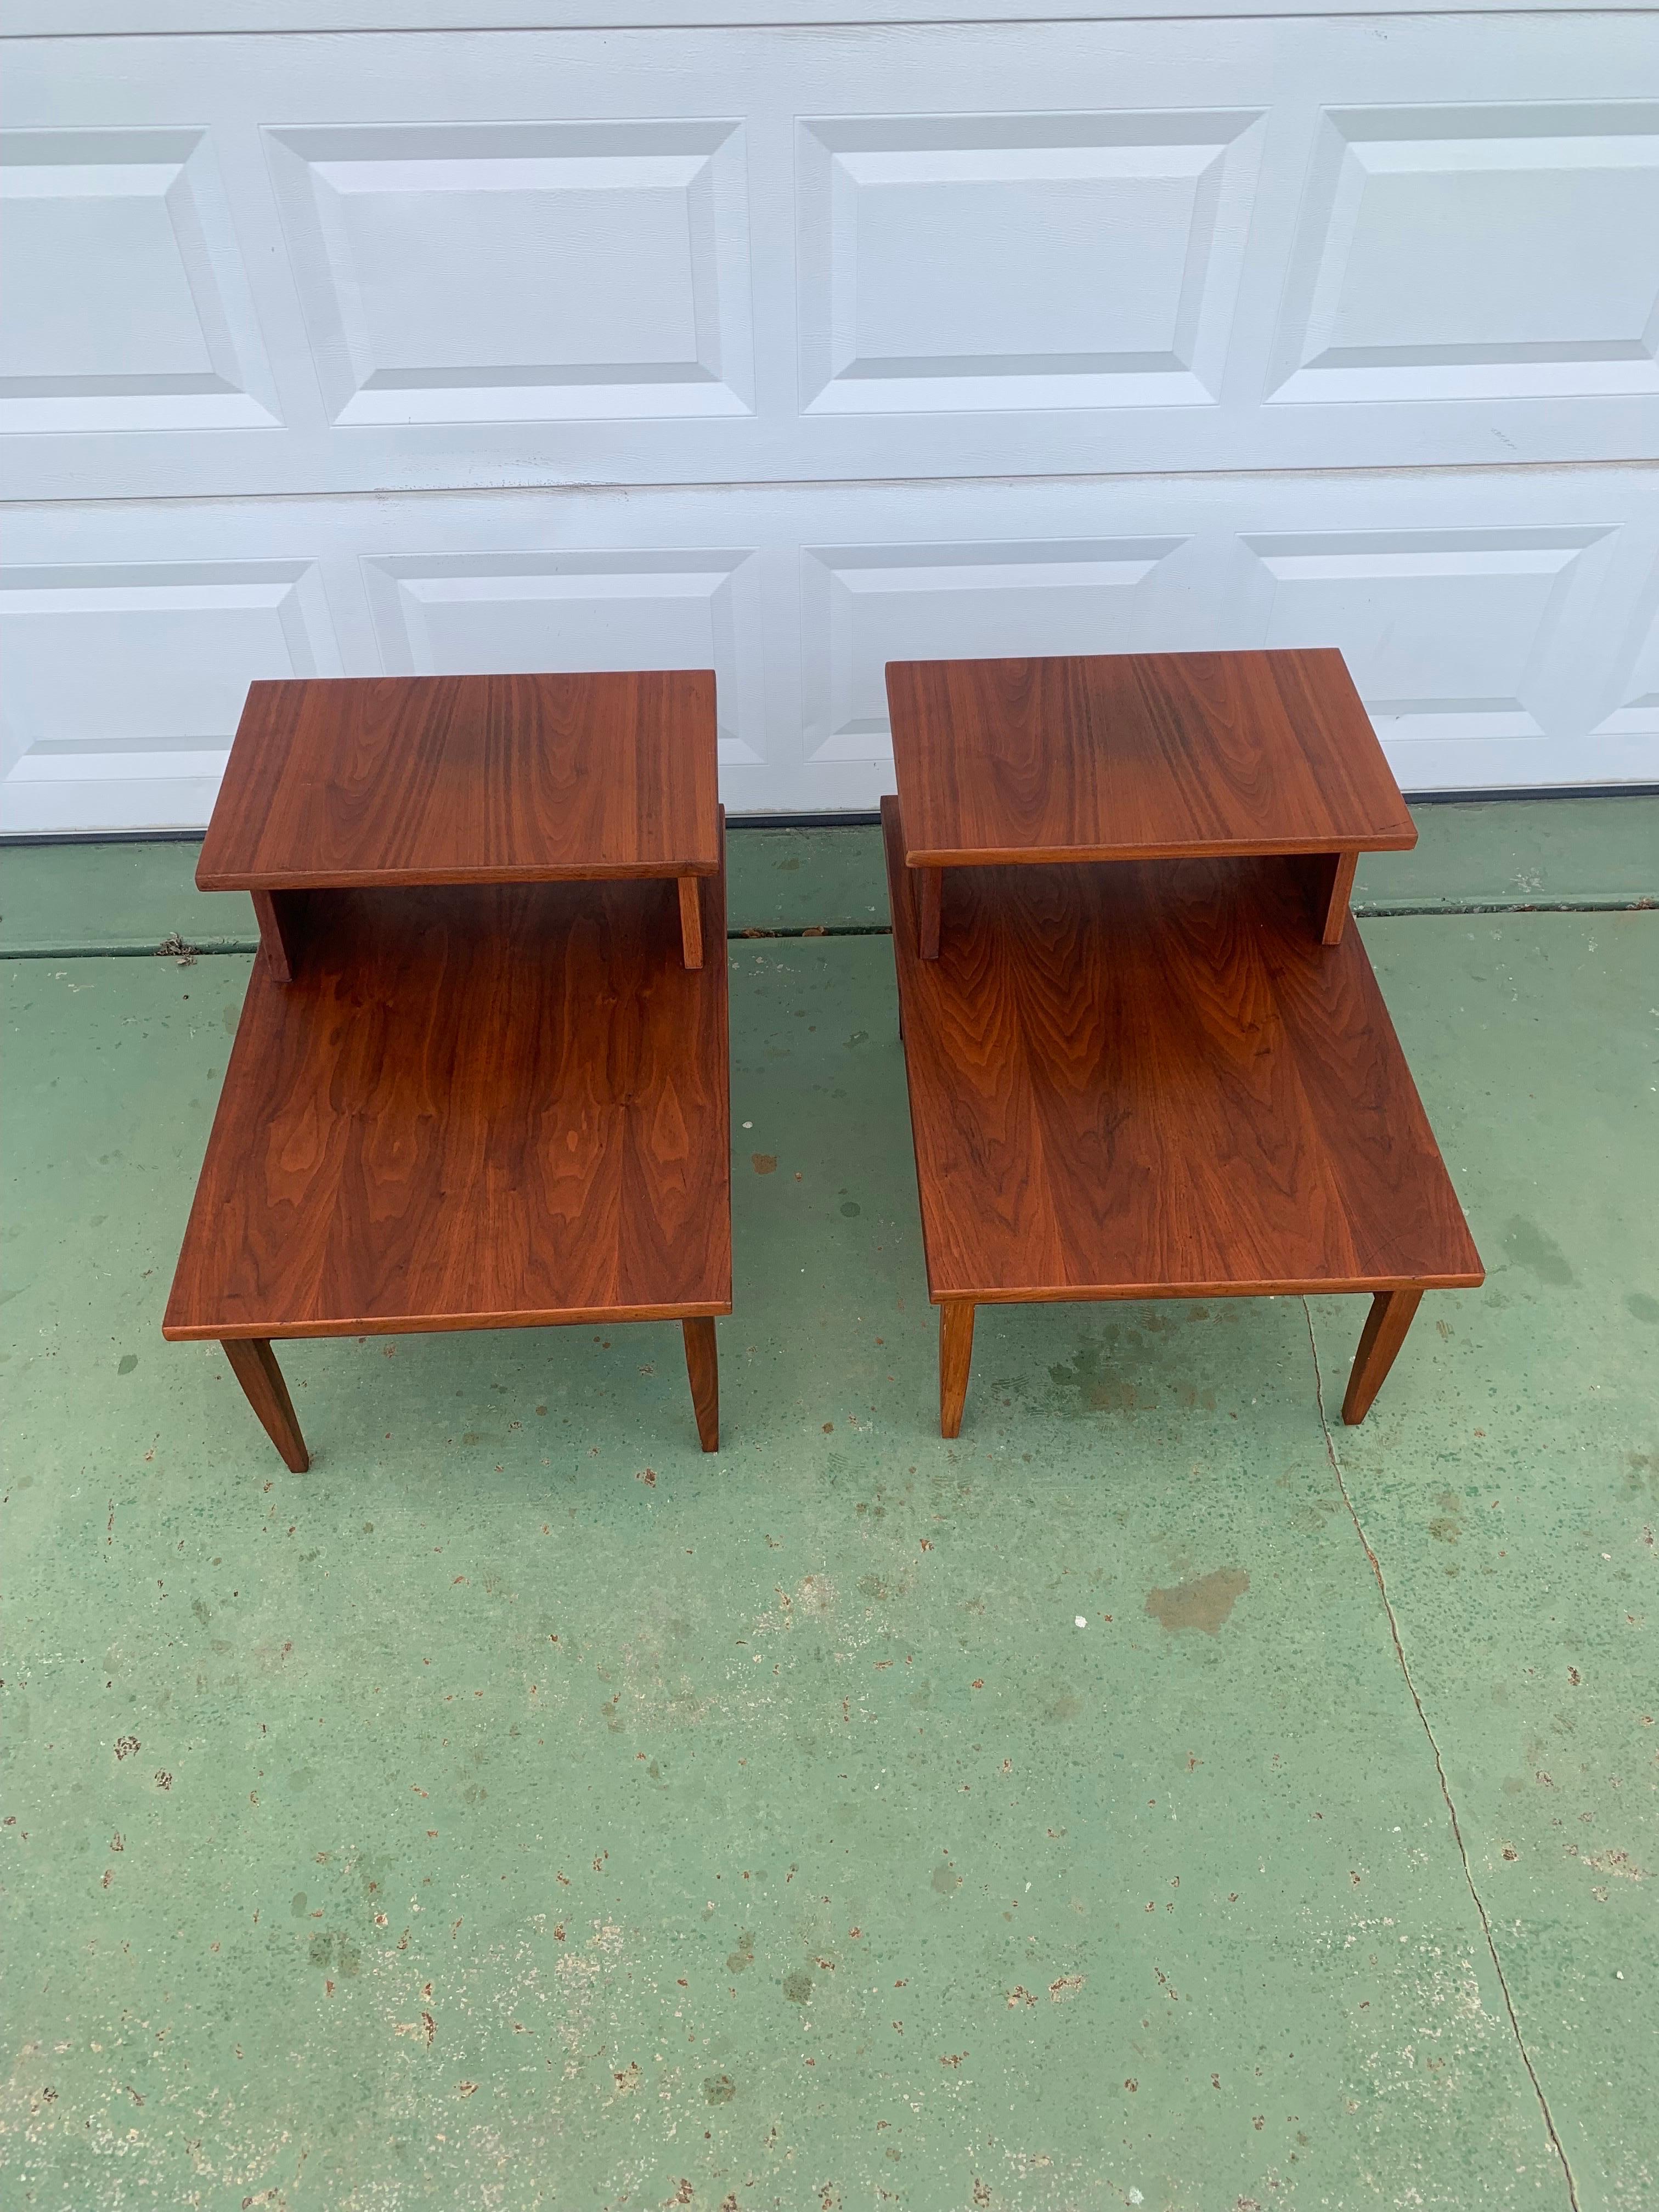 Beautiful pair of Mid-Century Modern two tiered end tables. Recently refinished walnut with brass accents. Beautiful grain pops as it flows from one end of the table to the other. The tables also have a magazine rack on the below the main table top.